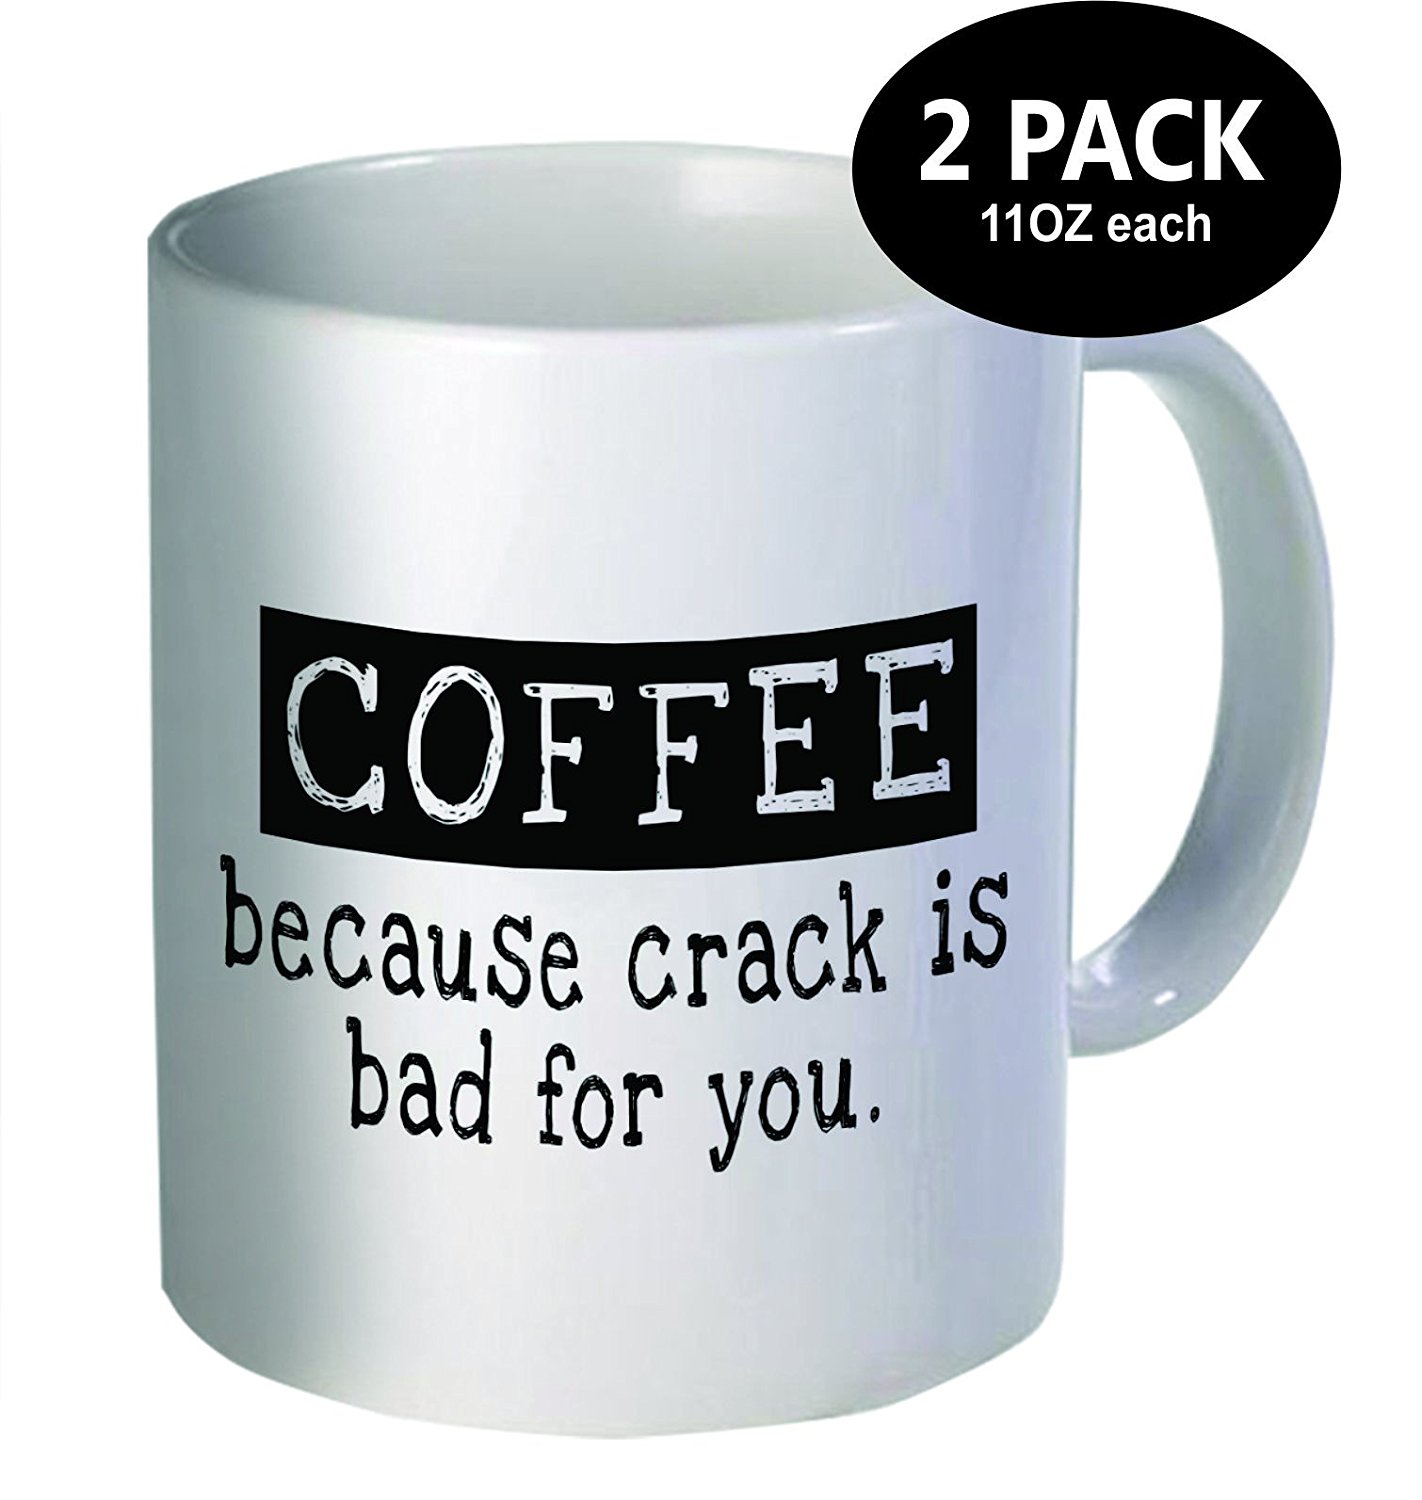 "Coffee - because crack is bad for you" Set of 2 Mugs